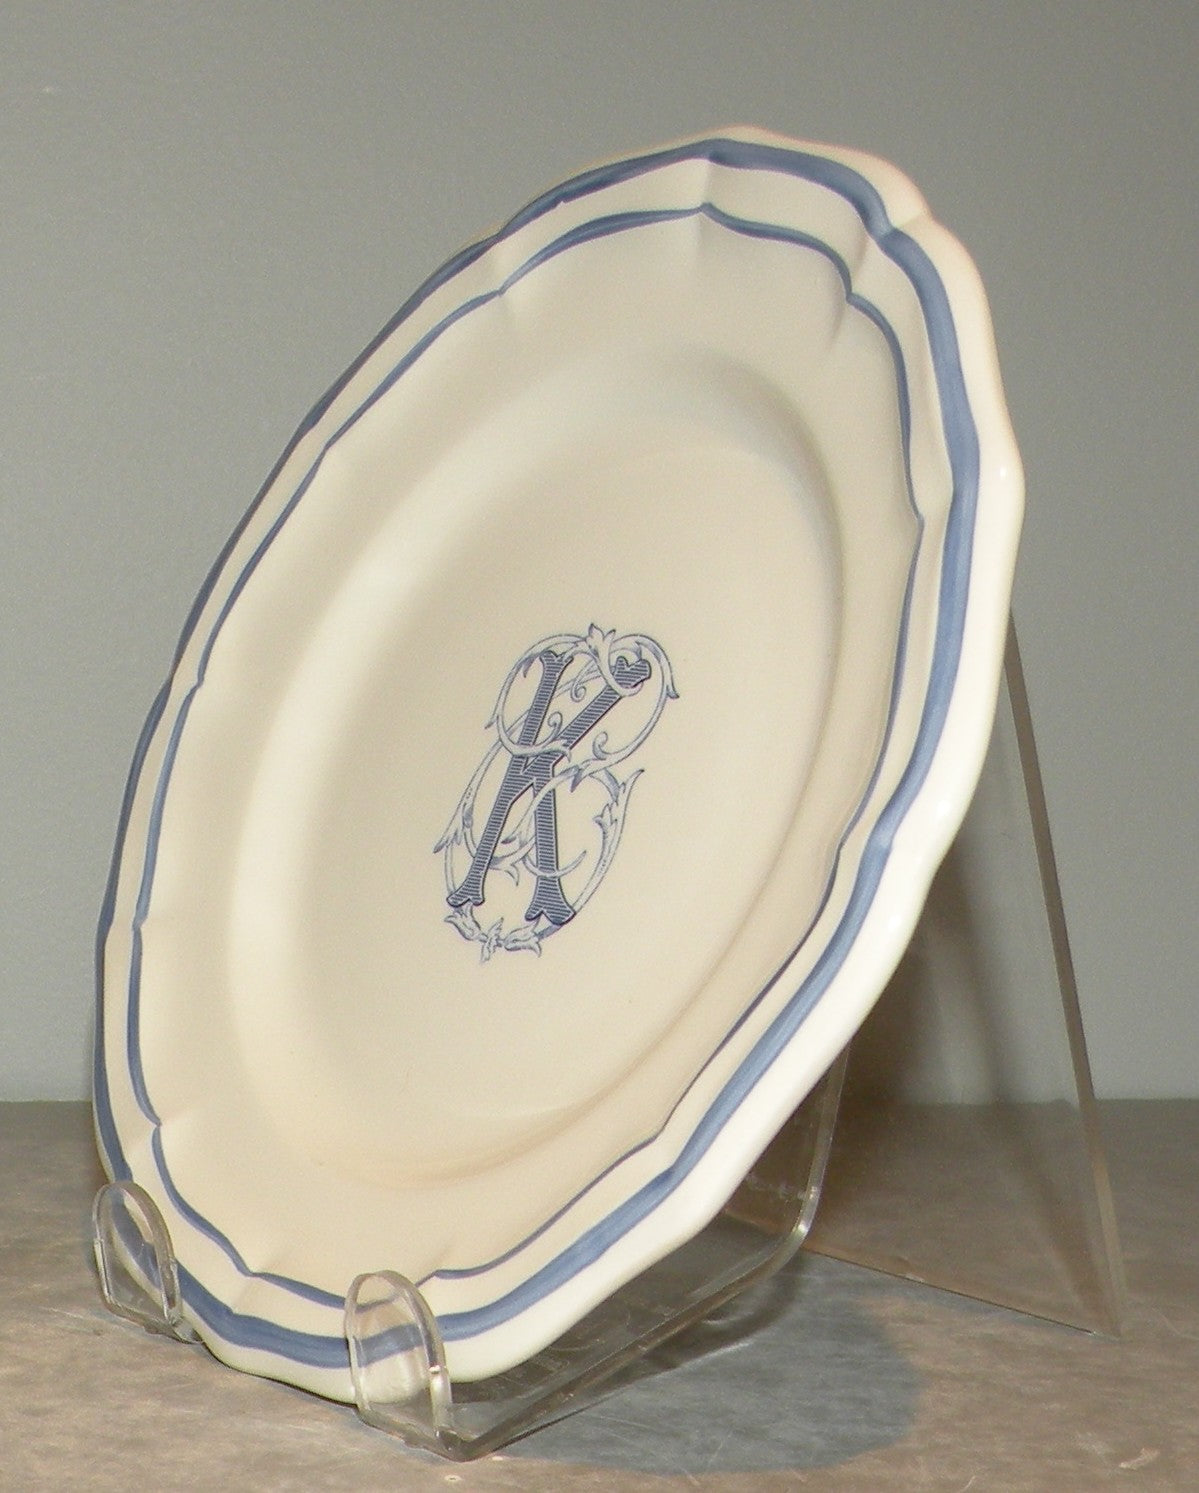 Bread & Butter Plate with the letter K , Filet Bleu Monogramme